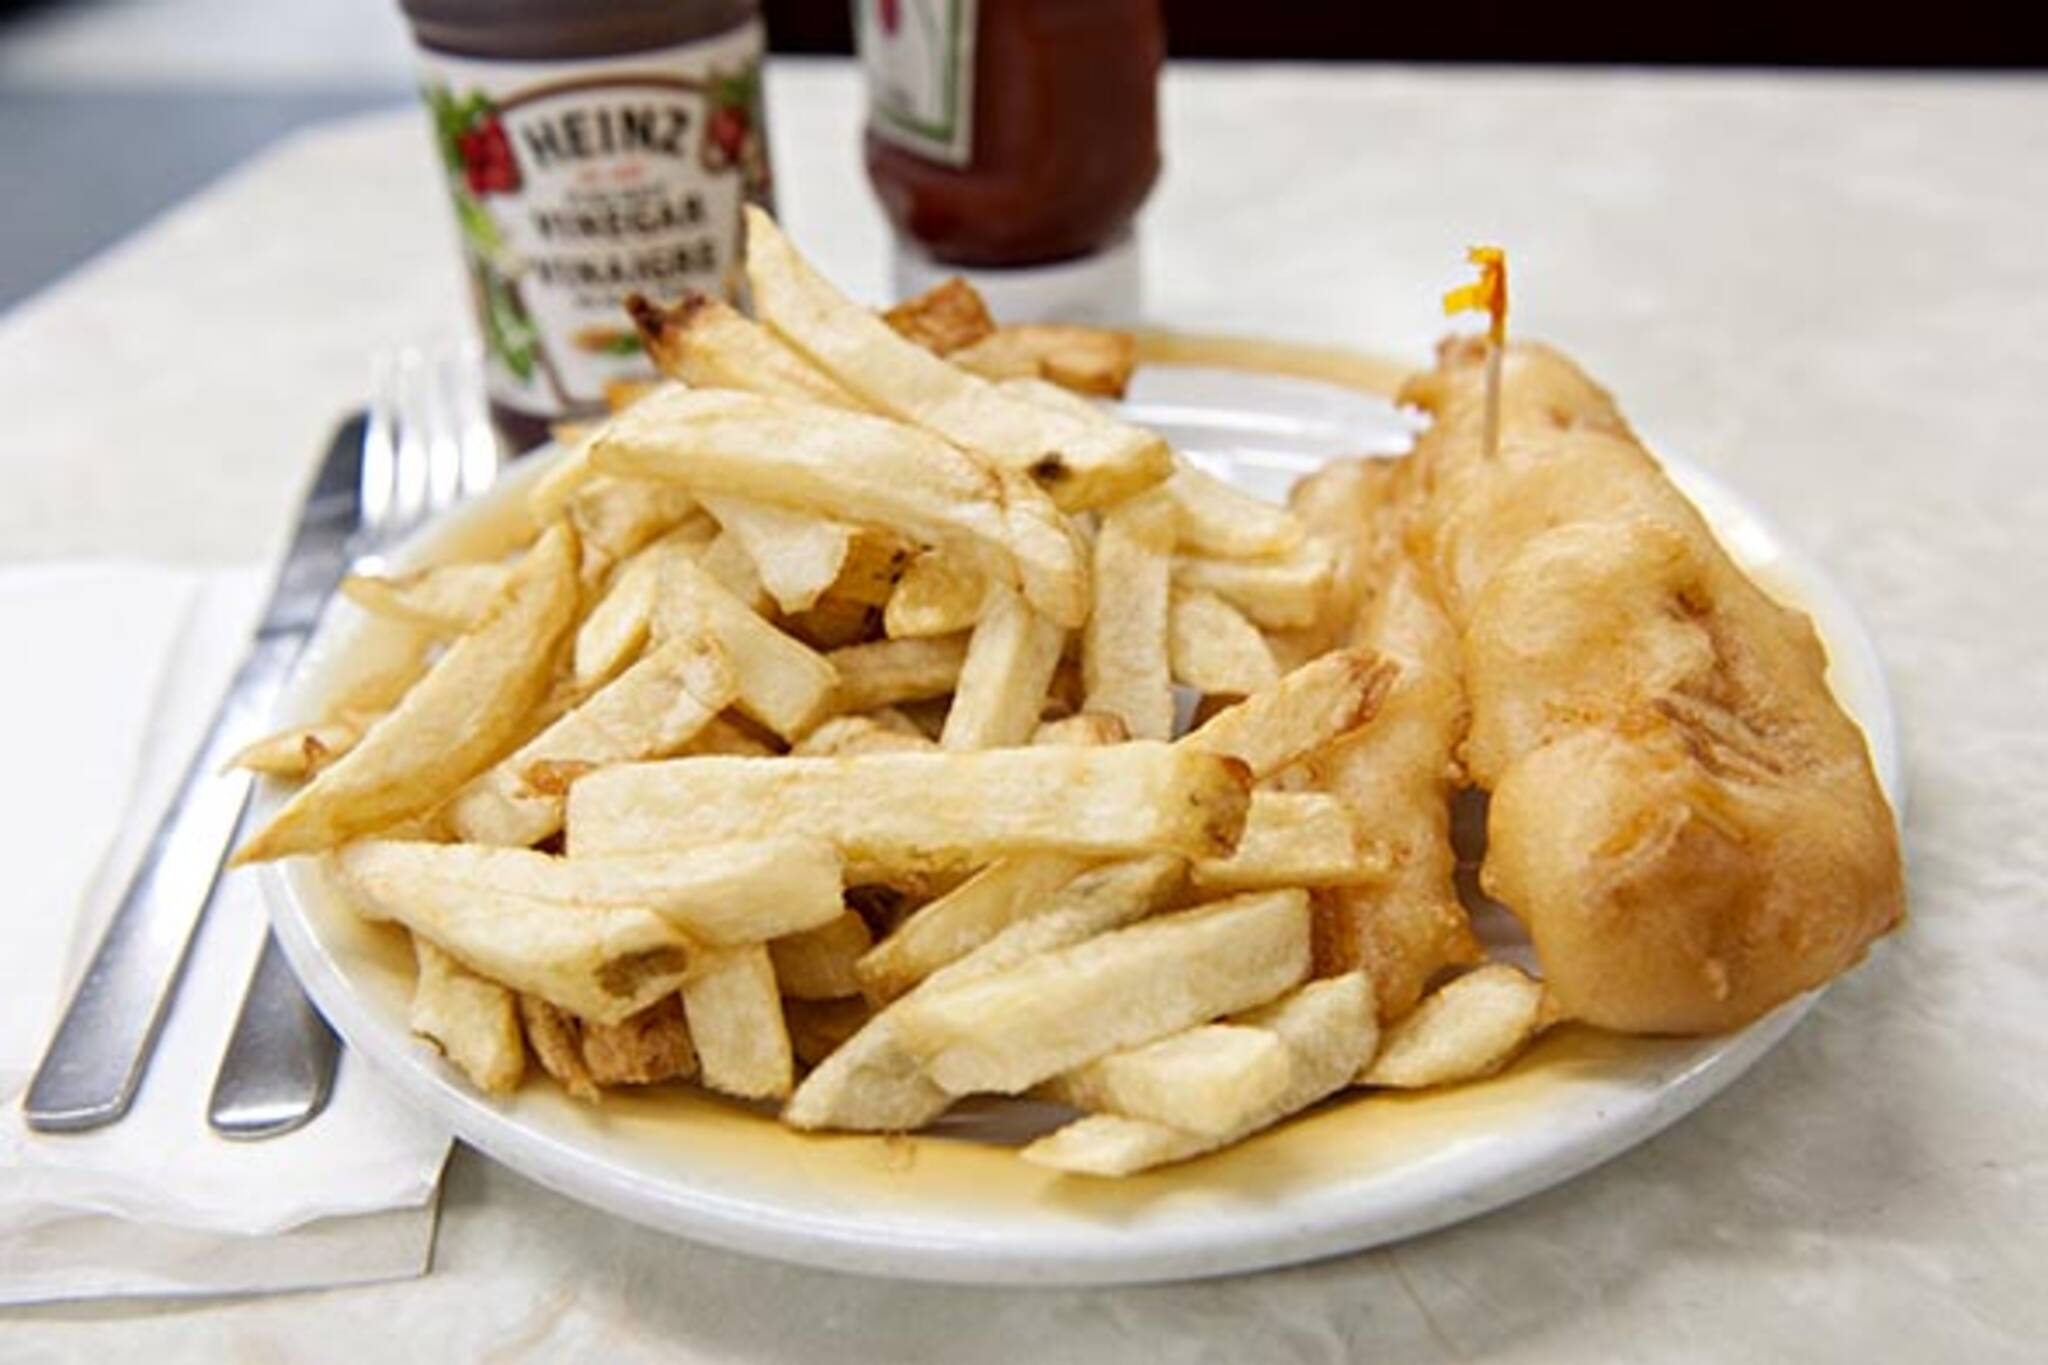 New Toronto Fish and Chips